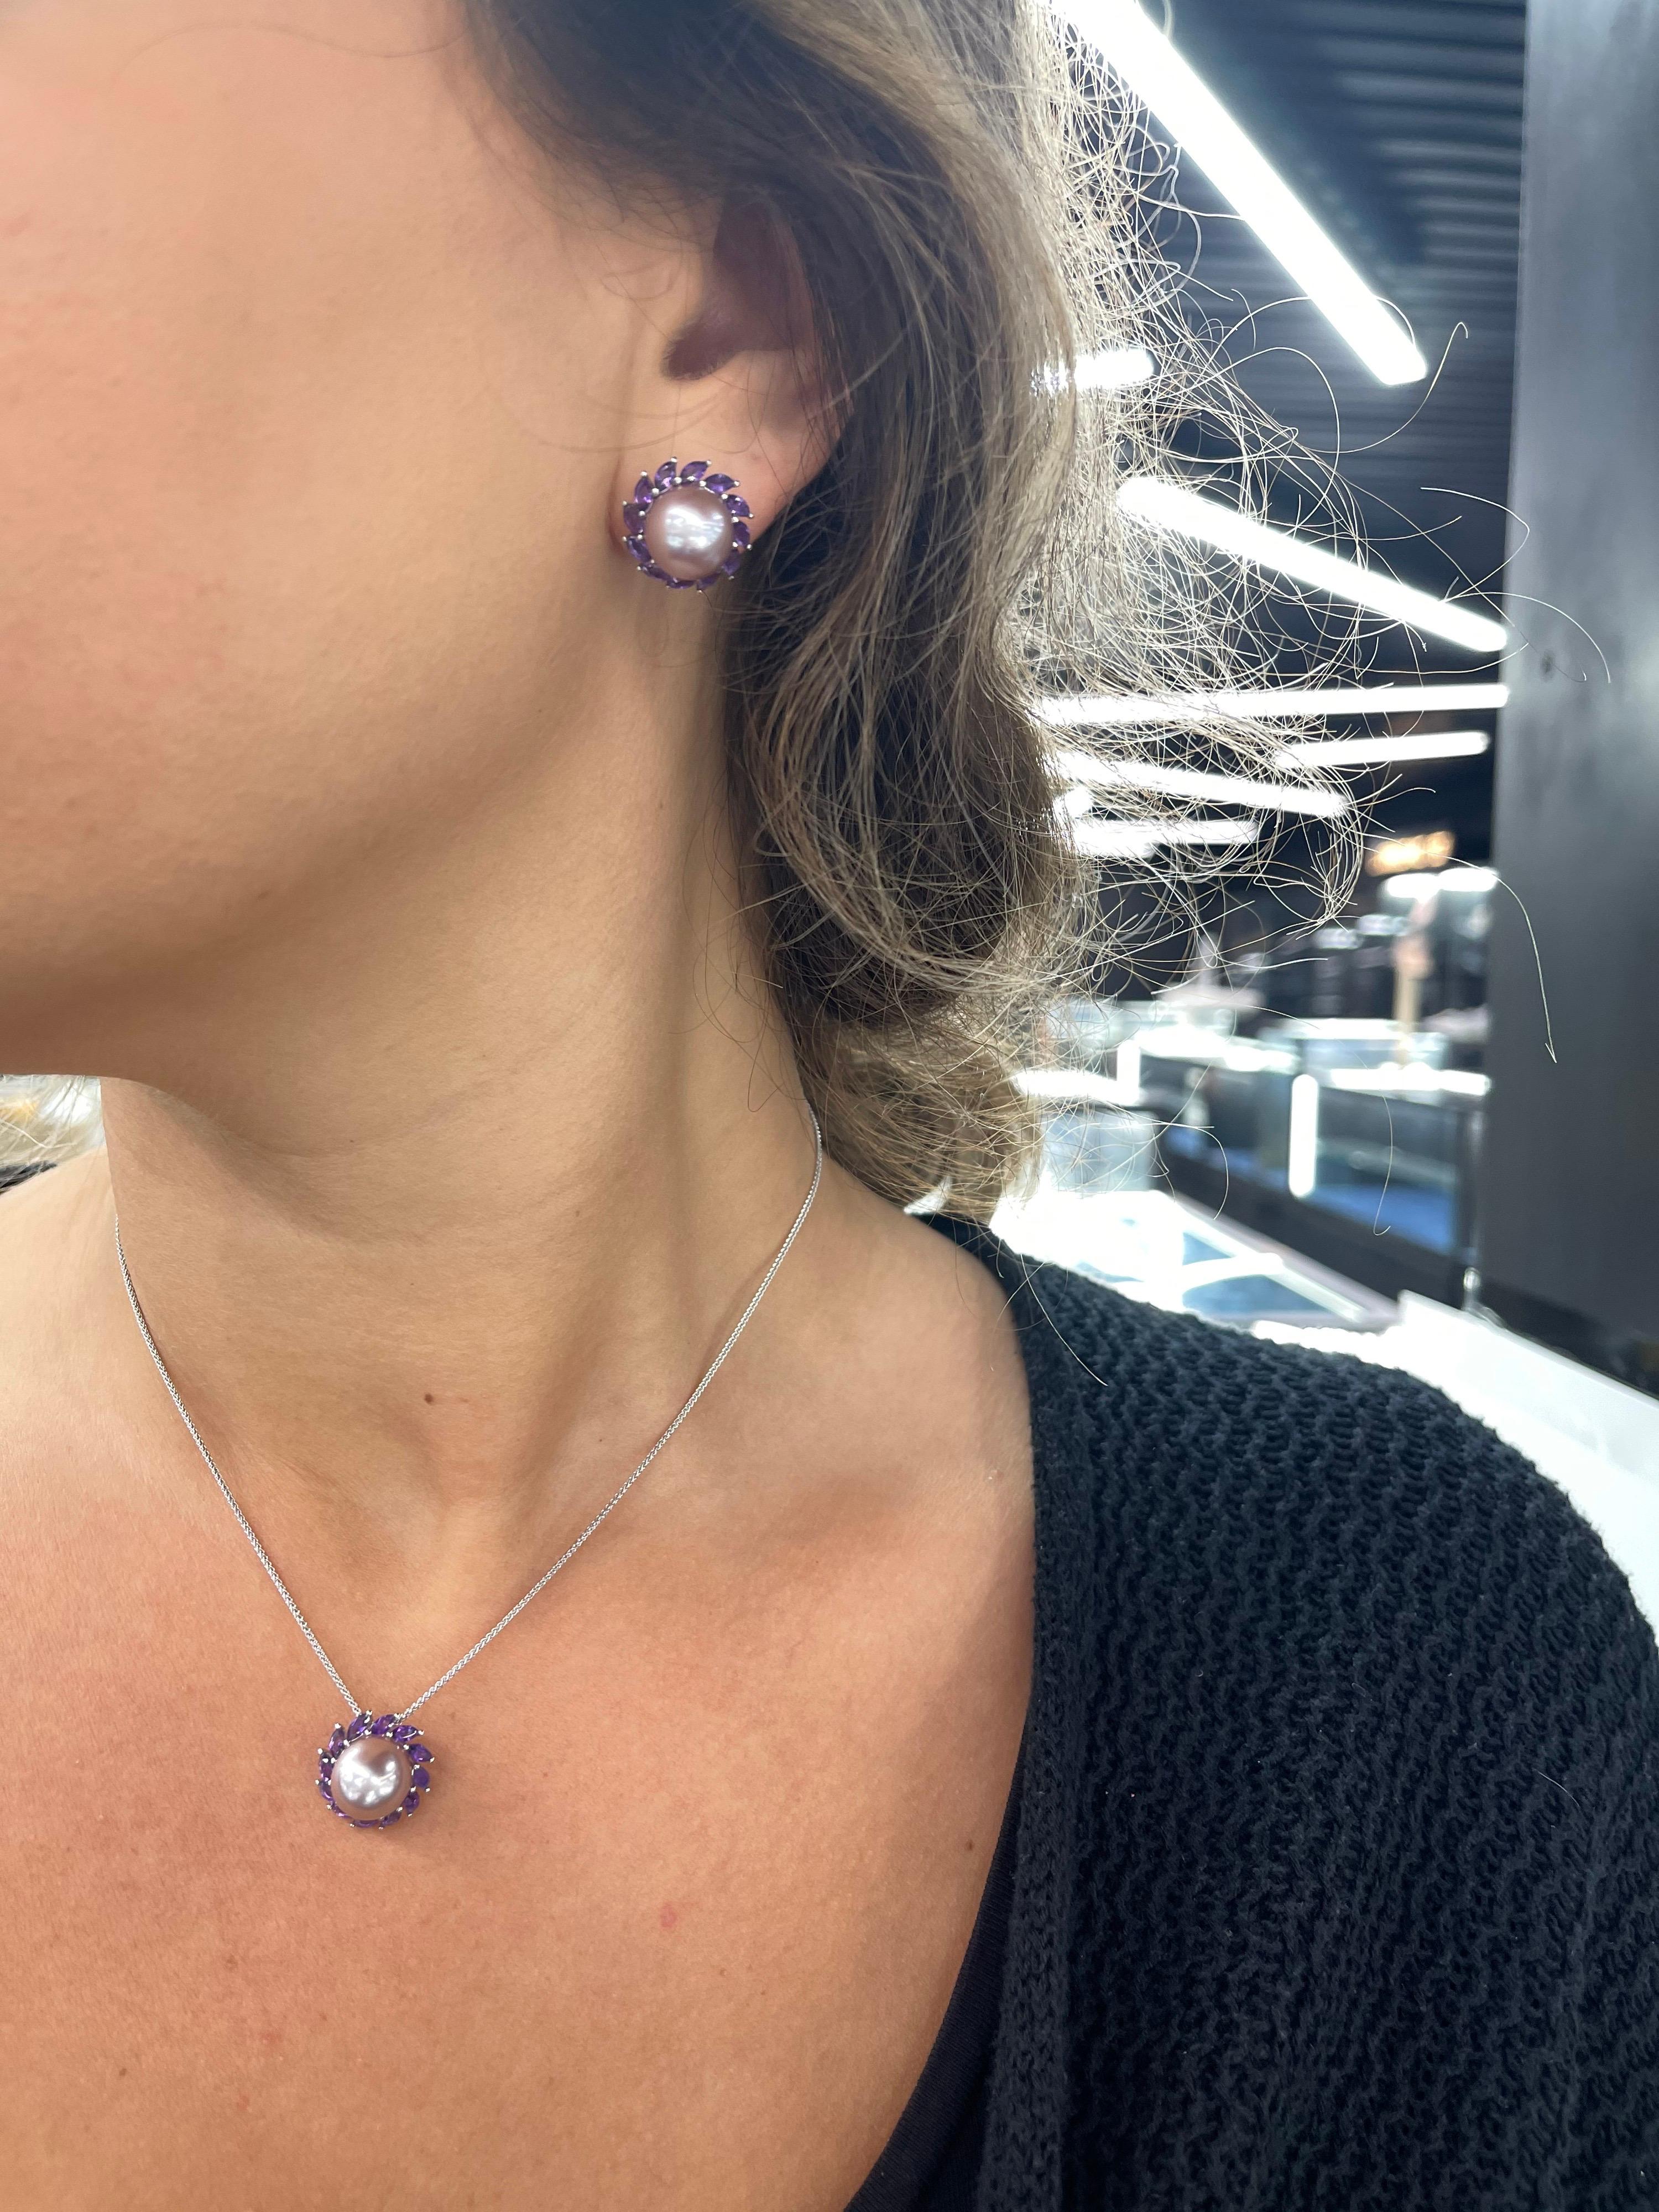 14 Karat White gold stud earrings featuring two Pink Freshwater Pearls measuring 10-11 mm flanked with marquise shape Amethysts weighing 1.81 carats.
Matching Necklace In Stock.